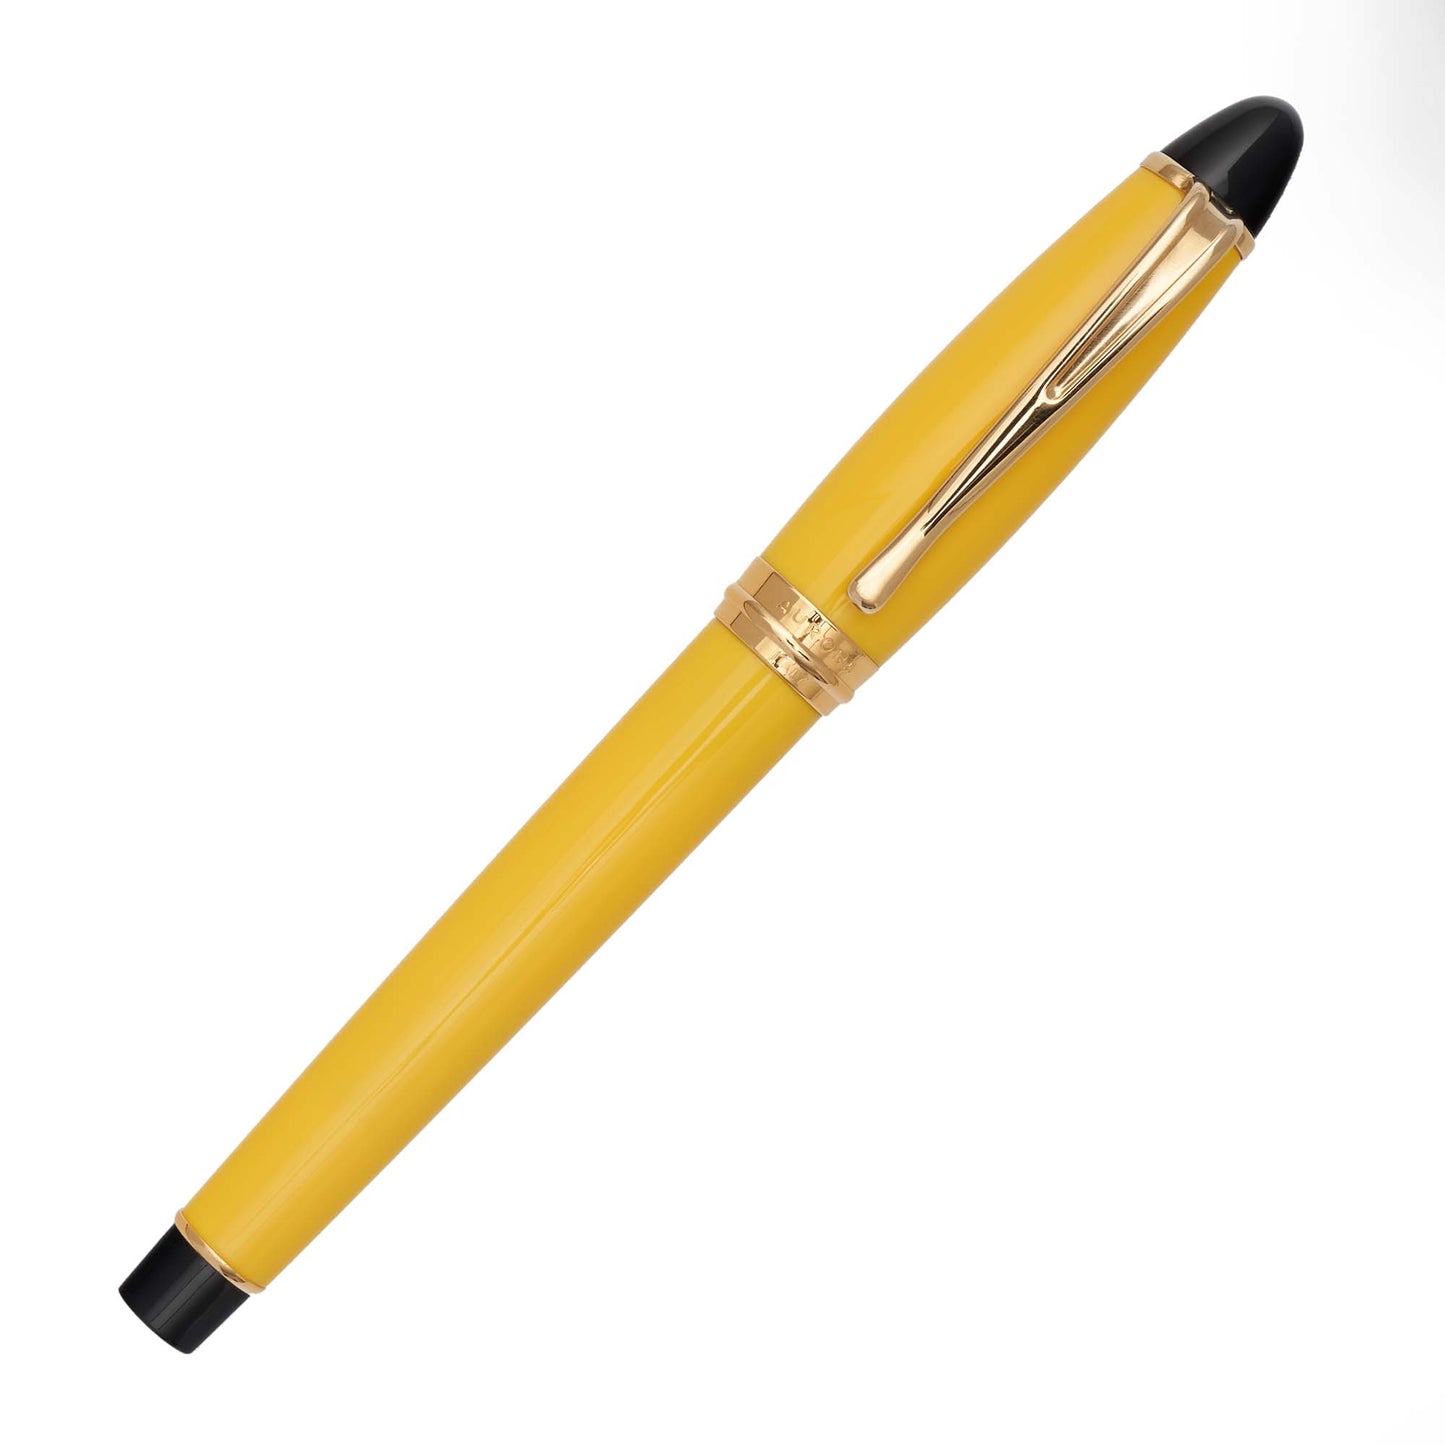 Aurora Ipsilon Fountain Pen Made in Italy Capped Yellow and Gold